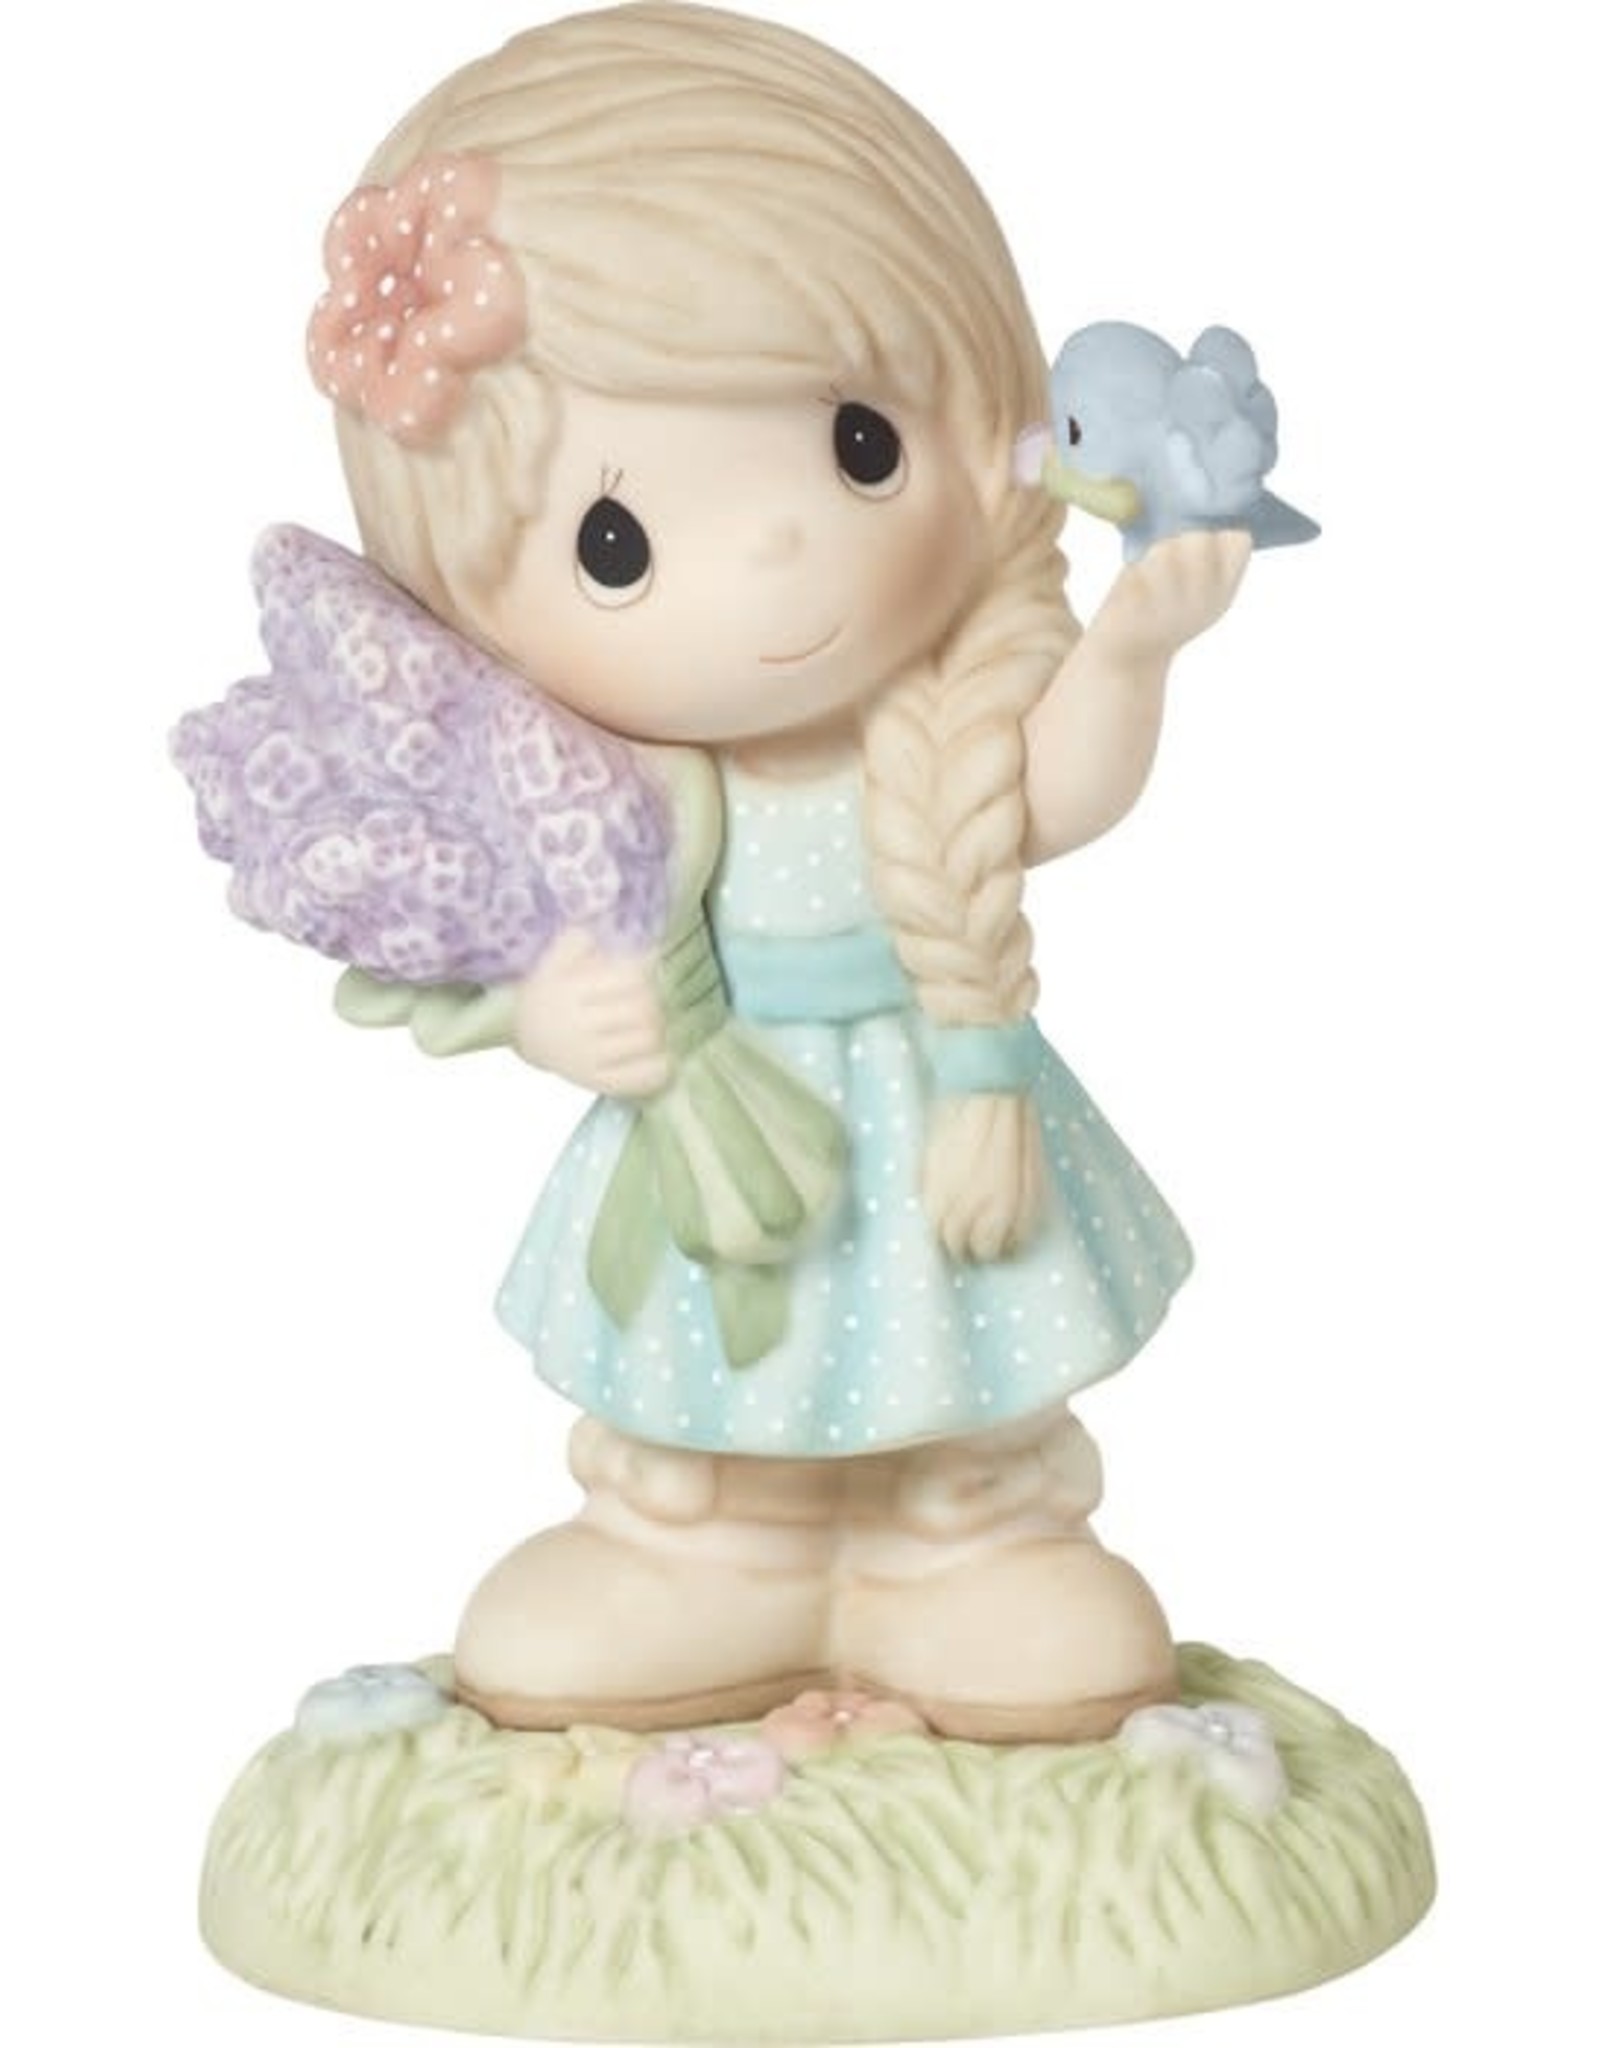 Precious Moments Precious Moments CC209001 2020 Collector's Club IG Kit Girl with Flowers Figurine